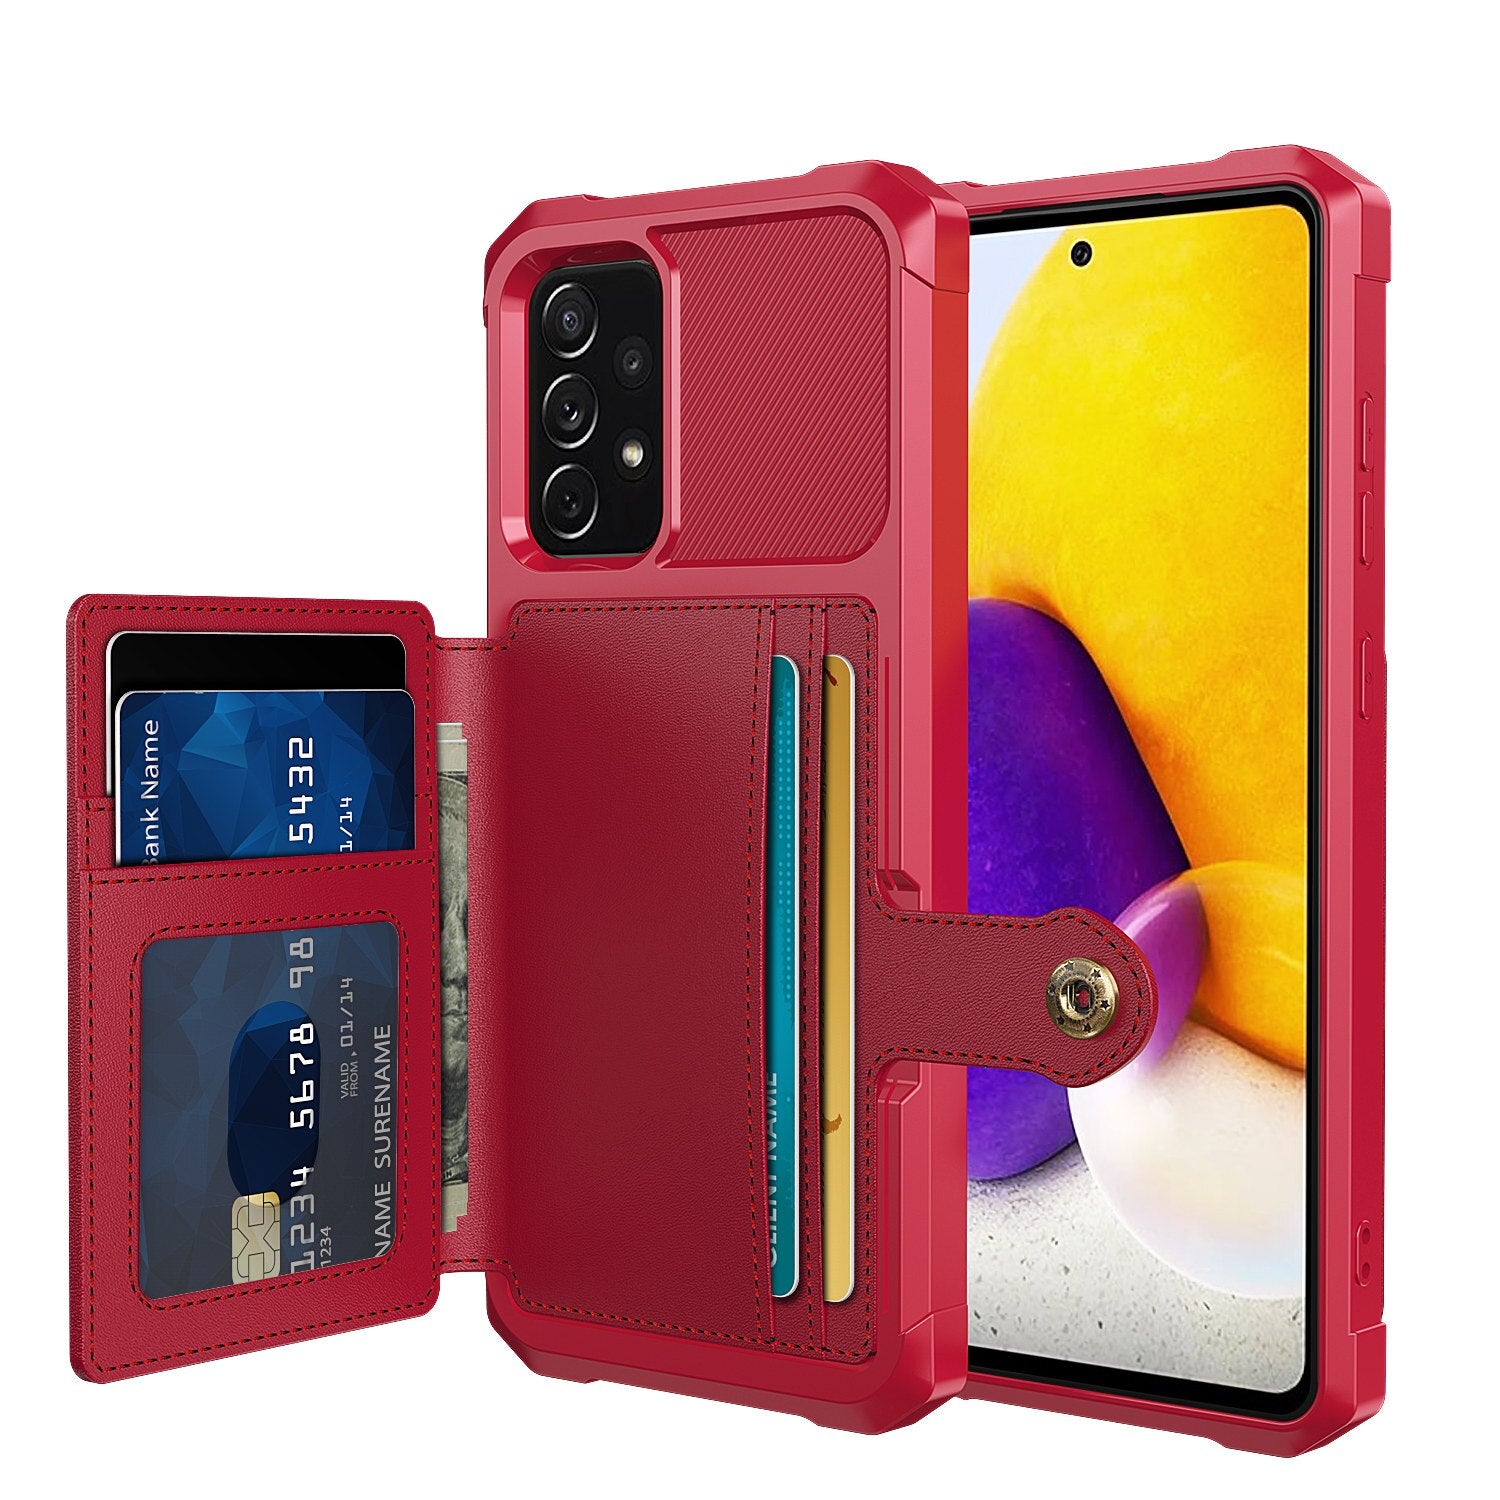 Samsung Galaxy A52/A72 Wallet Case, Luxury PU Leather Wallet Flip Cover Buckle - 380230 for Galaxy A52 / Red / United States Find Epic Store